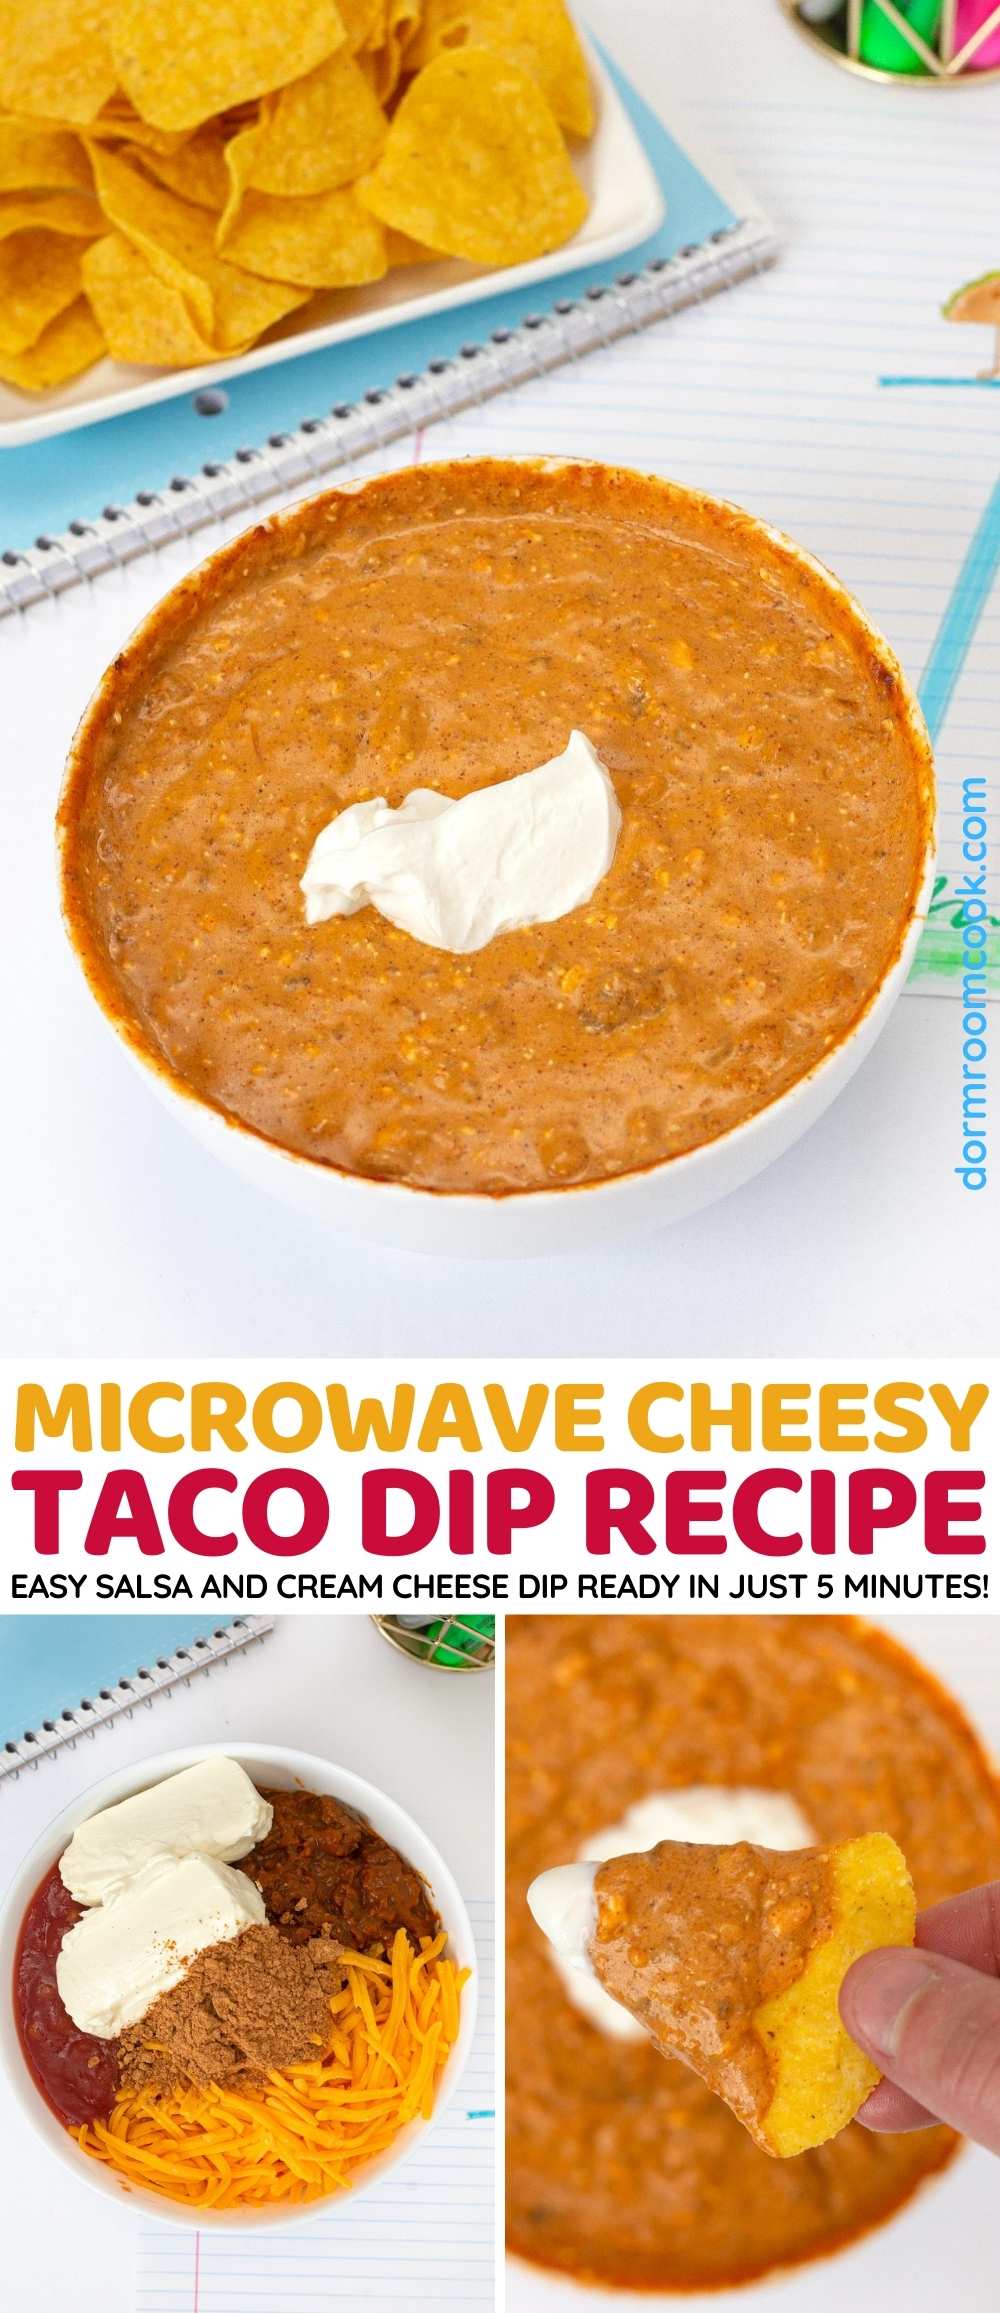 Microwave Cheesy Taco Dip collage